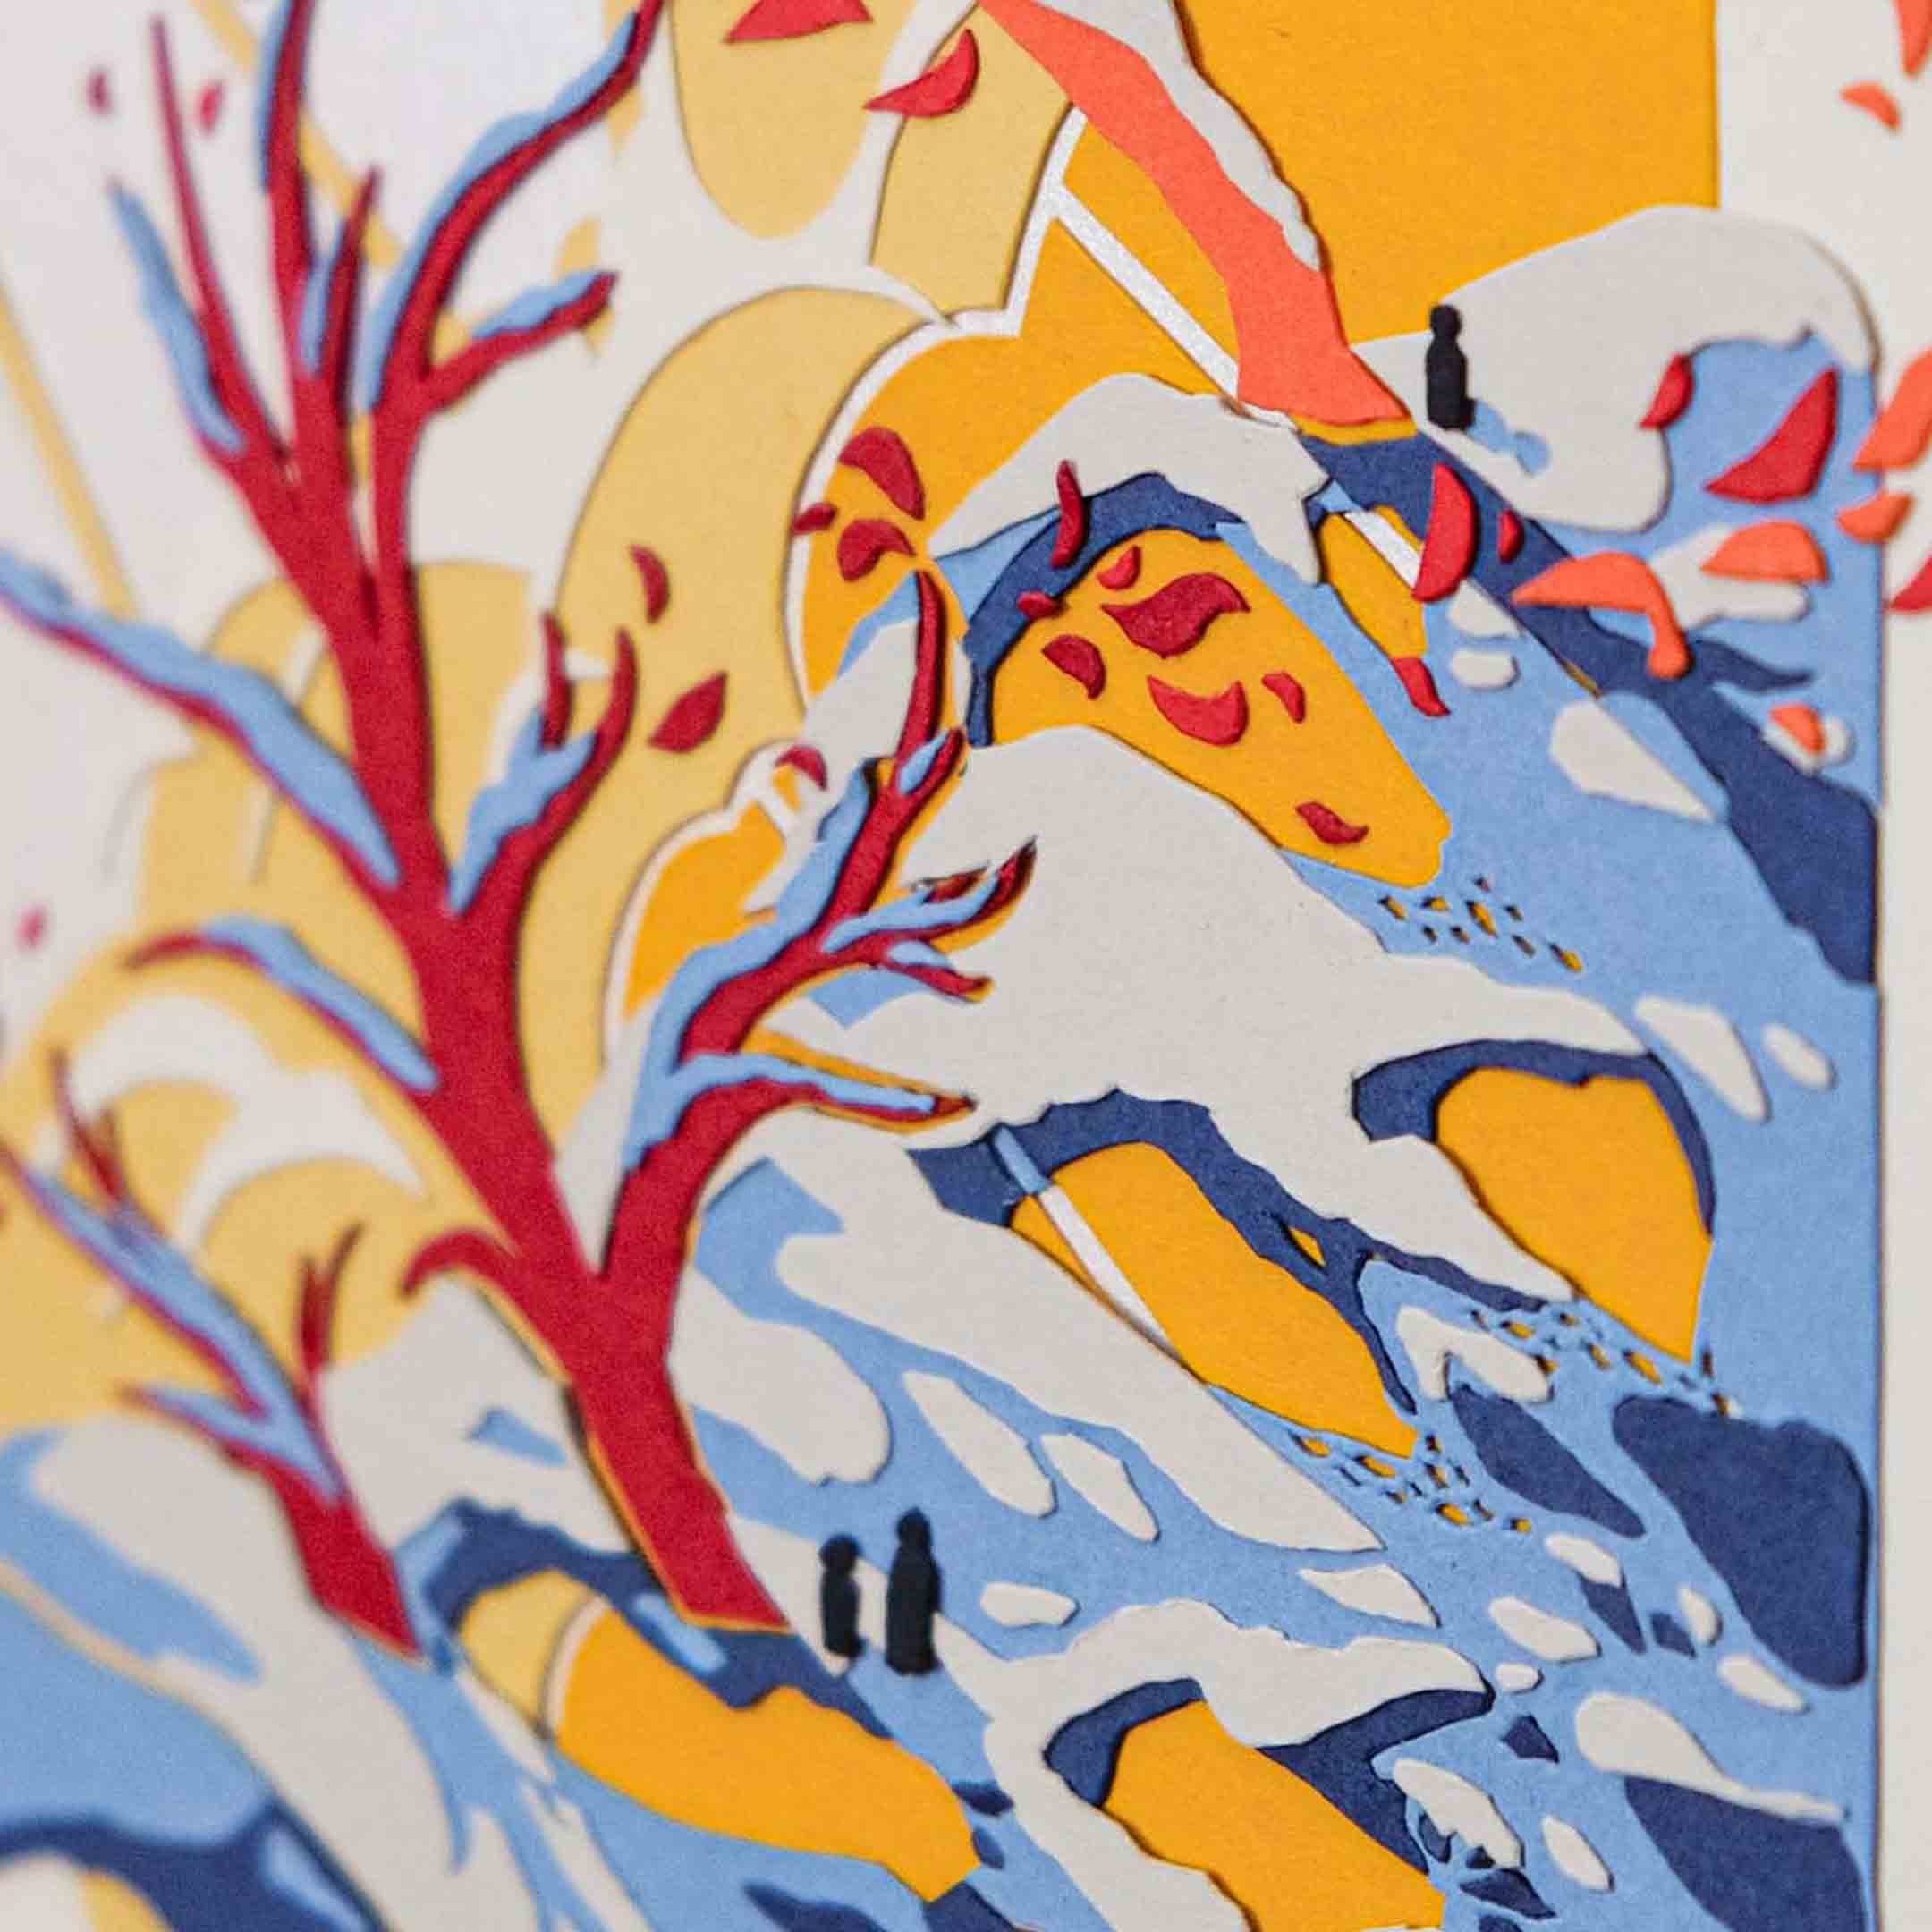 A close-up of the artwork shows the tiny silhouettes of people on the winter landscape underneath the trees.